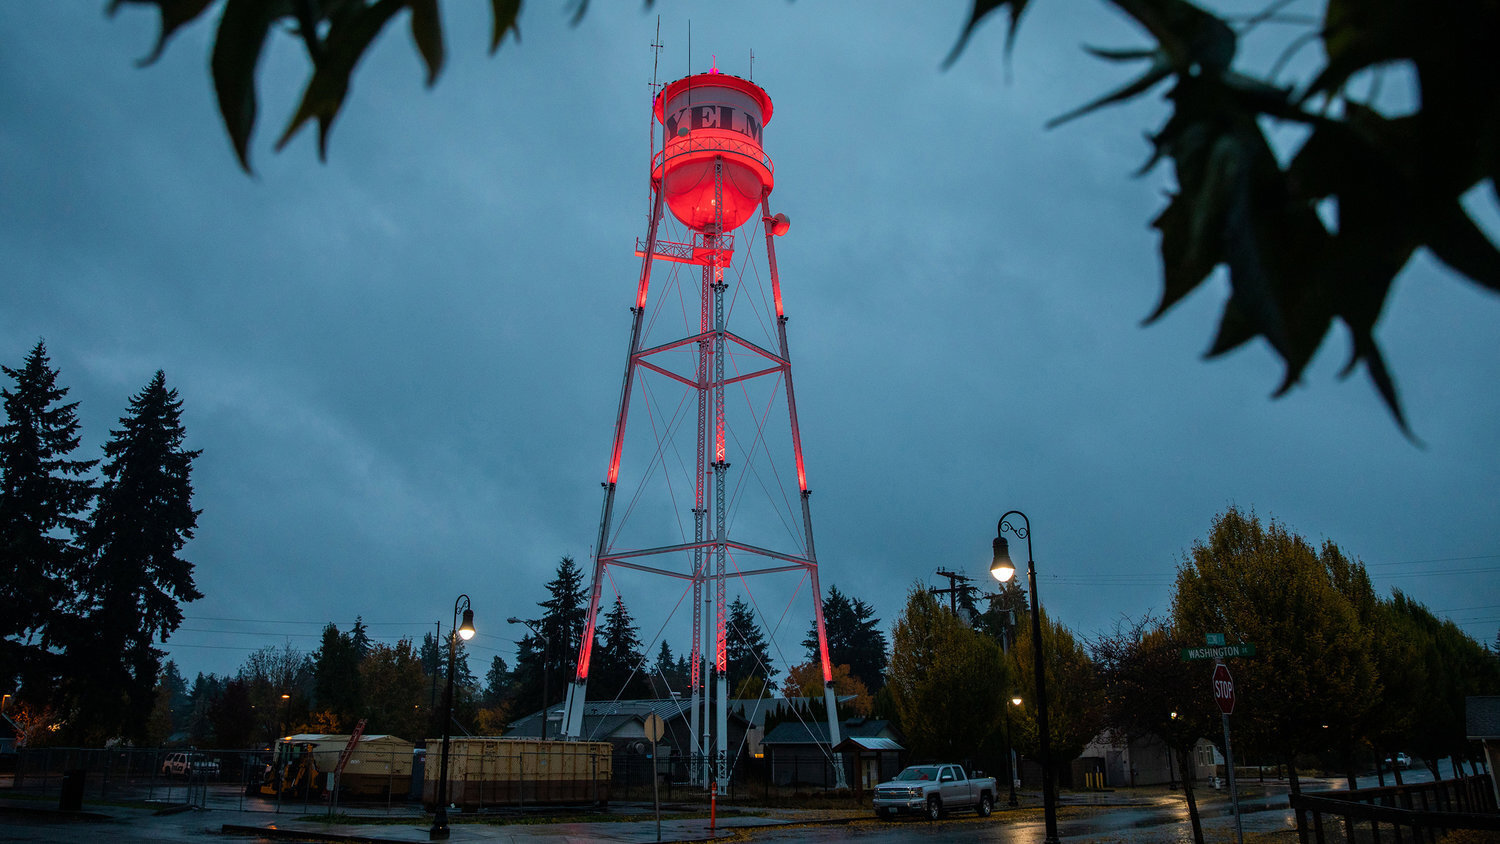 The Yelm water tower is illuminated in this file photo.